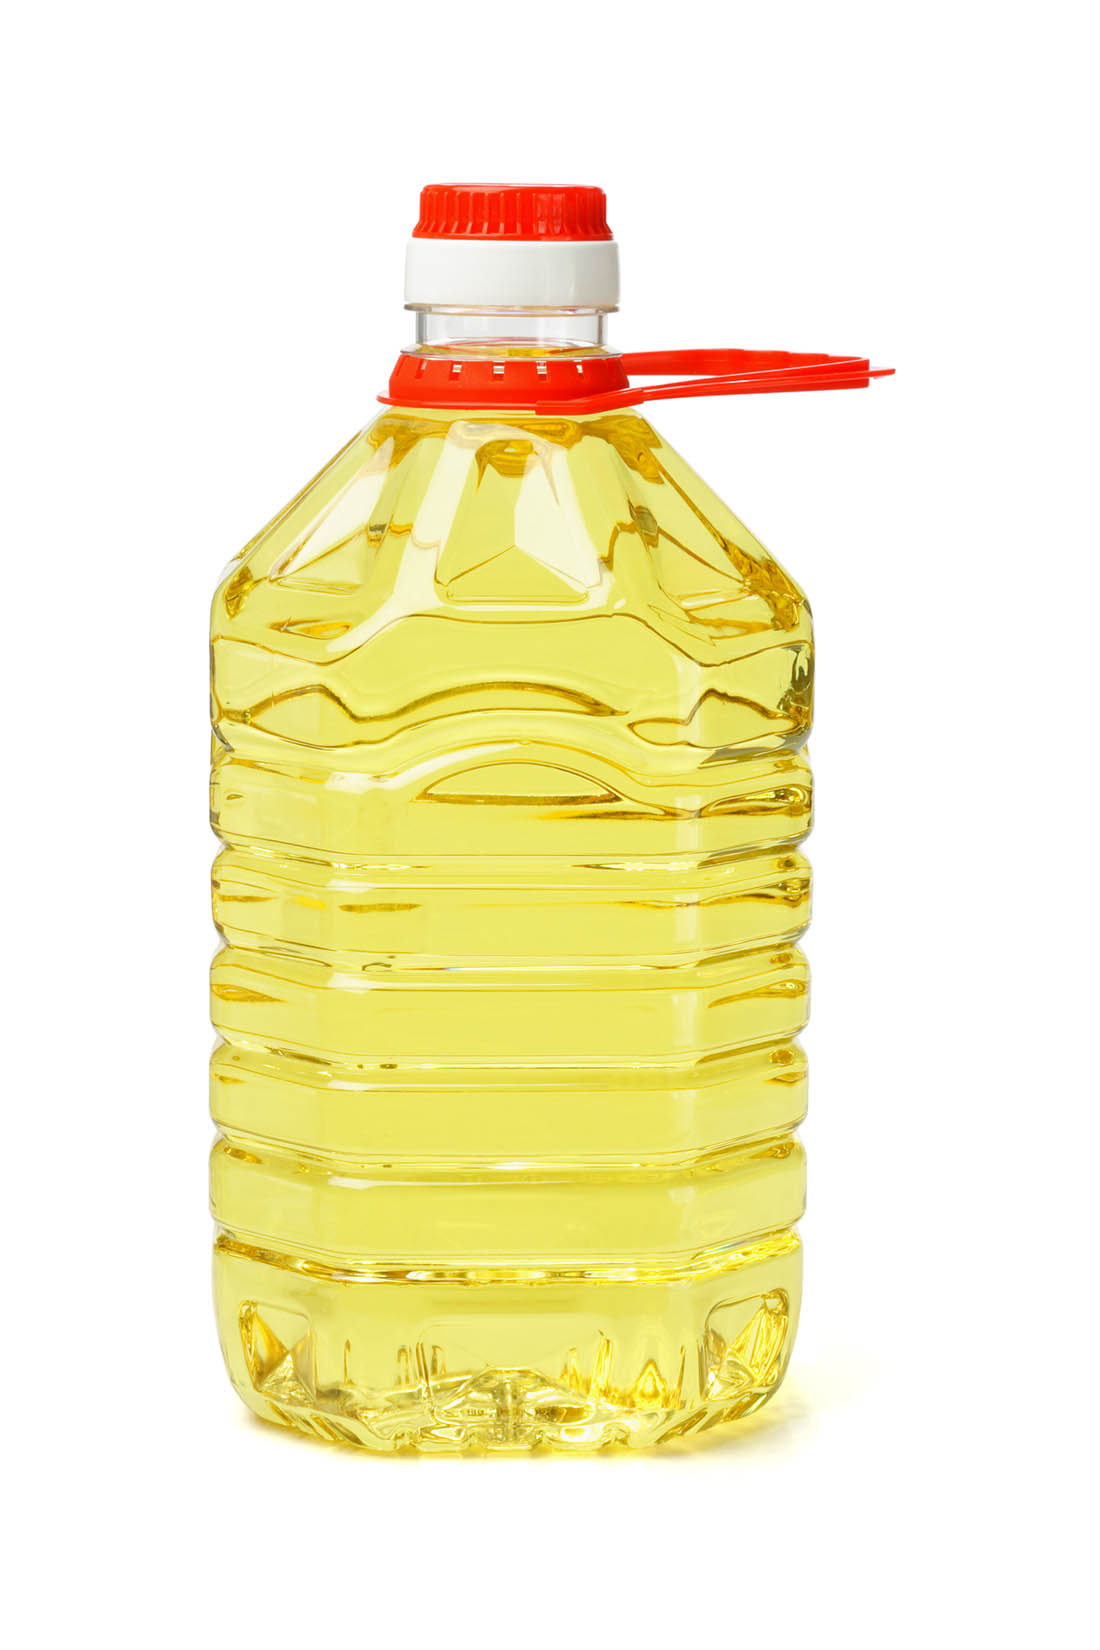 Plastic bottle of canola oil. Canola oil is a source of cooking oil, margarine, salad dressing and shortening.